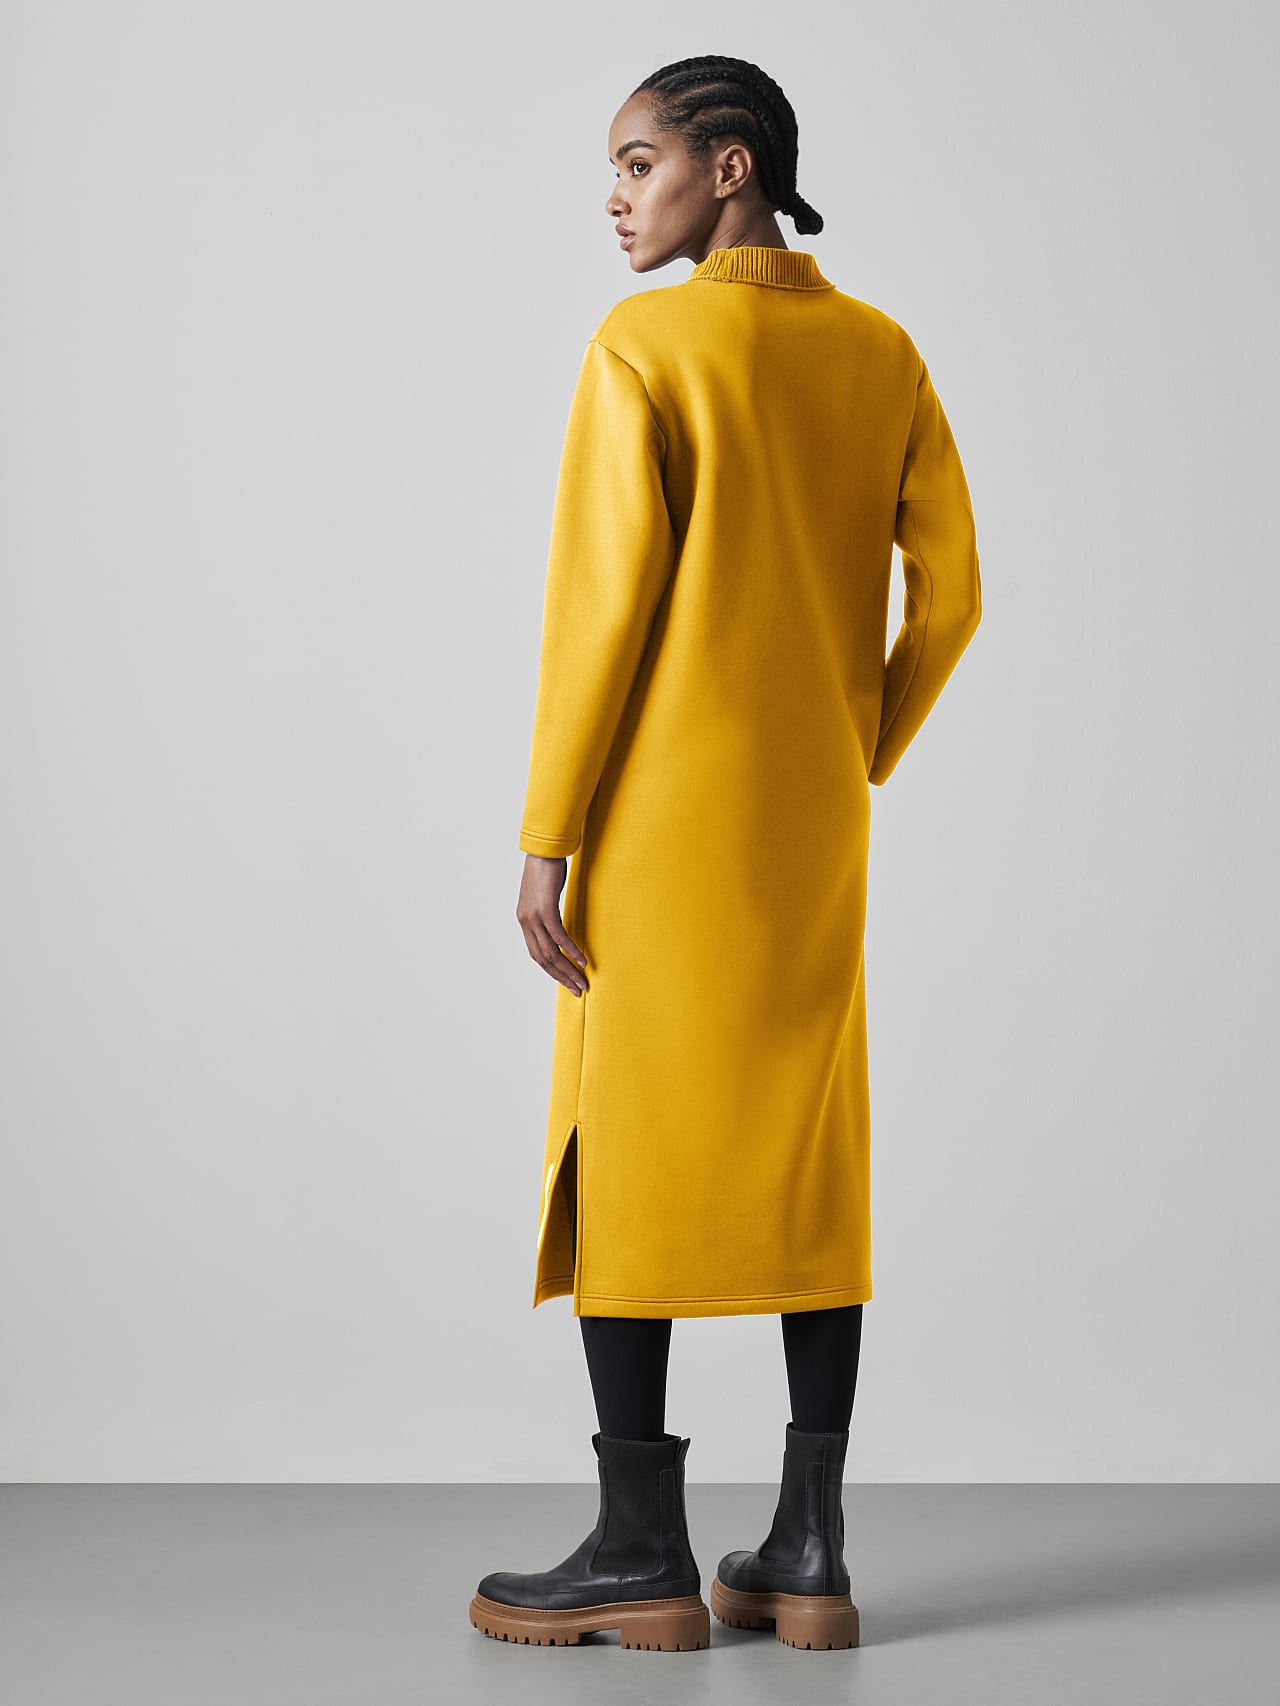 AlphaTauri | SINLE V1.Y5.02 | Technical Spacer Maxi Dress in yellow for Women